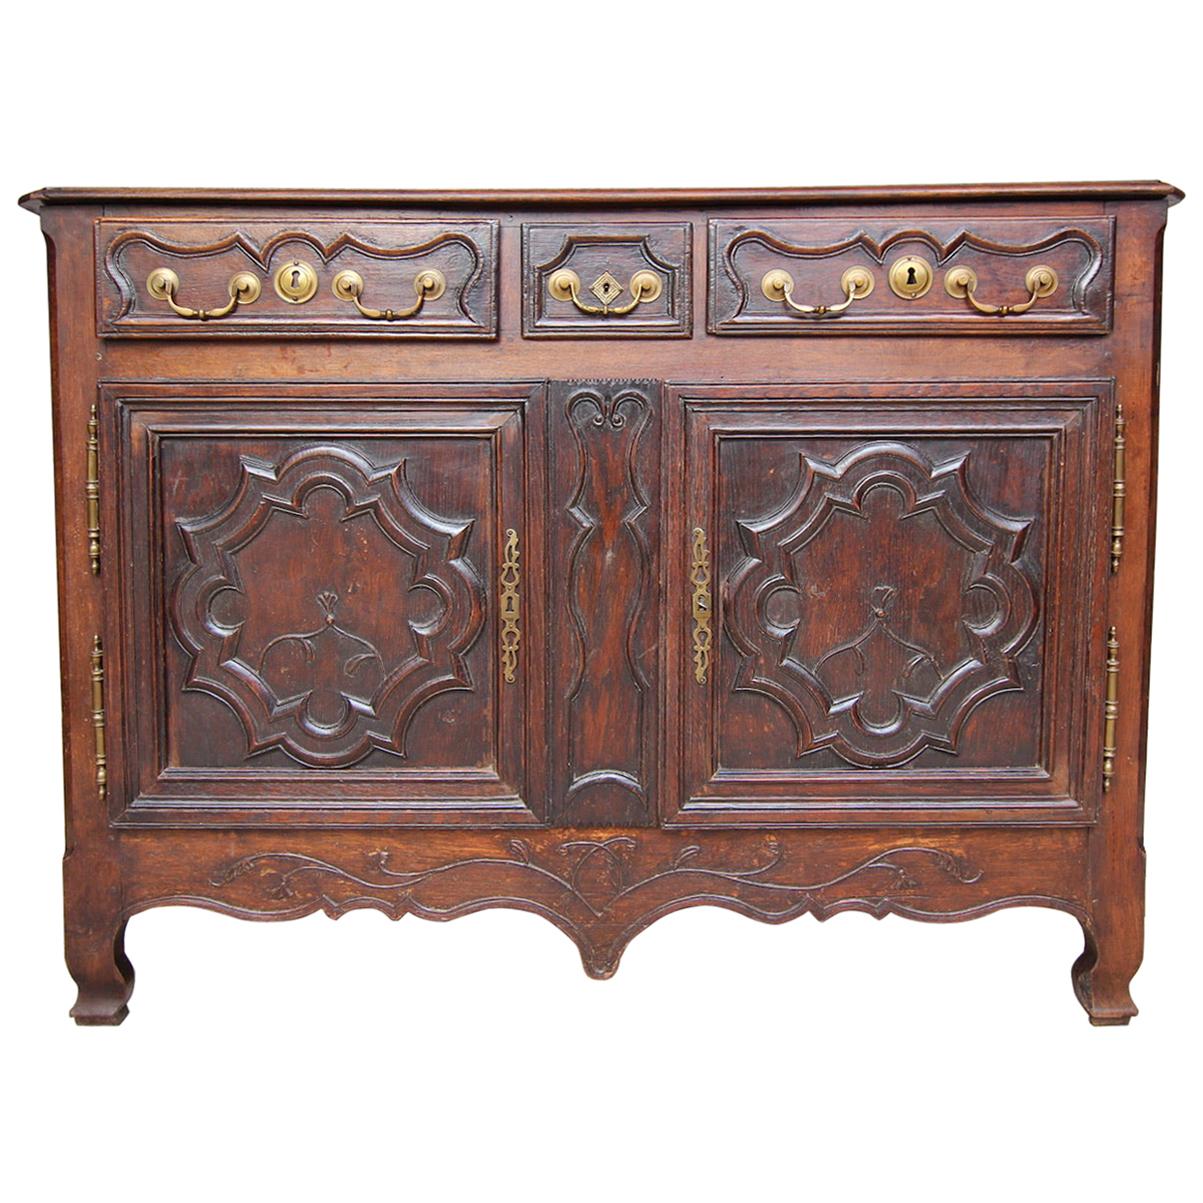 18th Century French Lorraine Sideboard Made of Oak